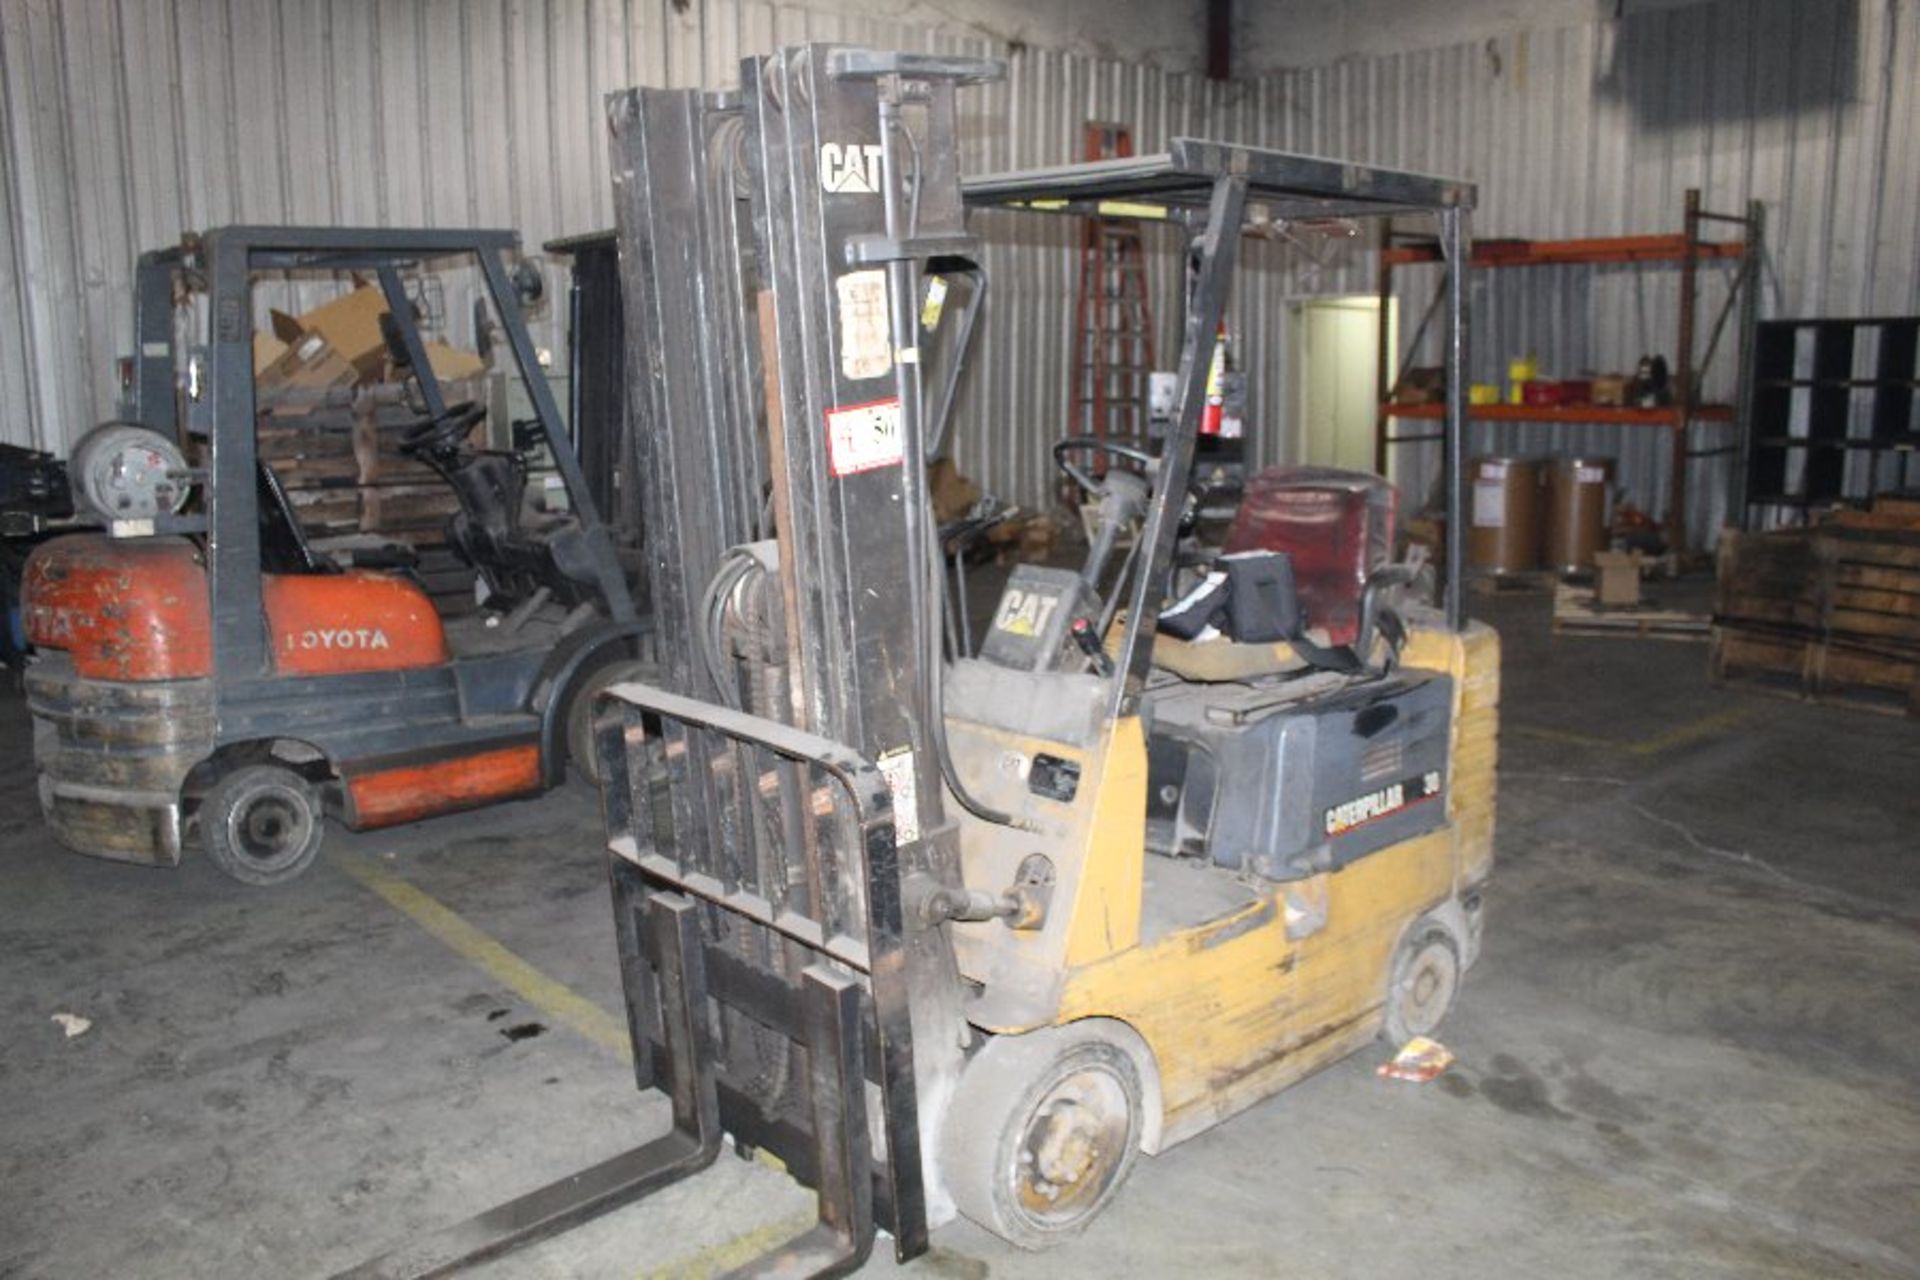 Cat Forklift GC15 2700LB, 130" Lift, solid tire, LP gas (needs rear spindle bearing)